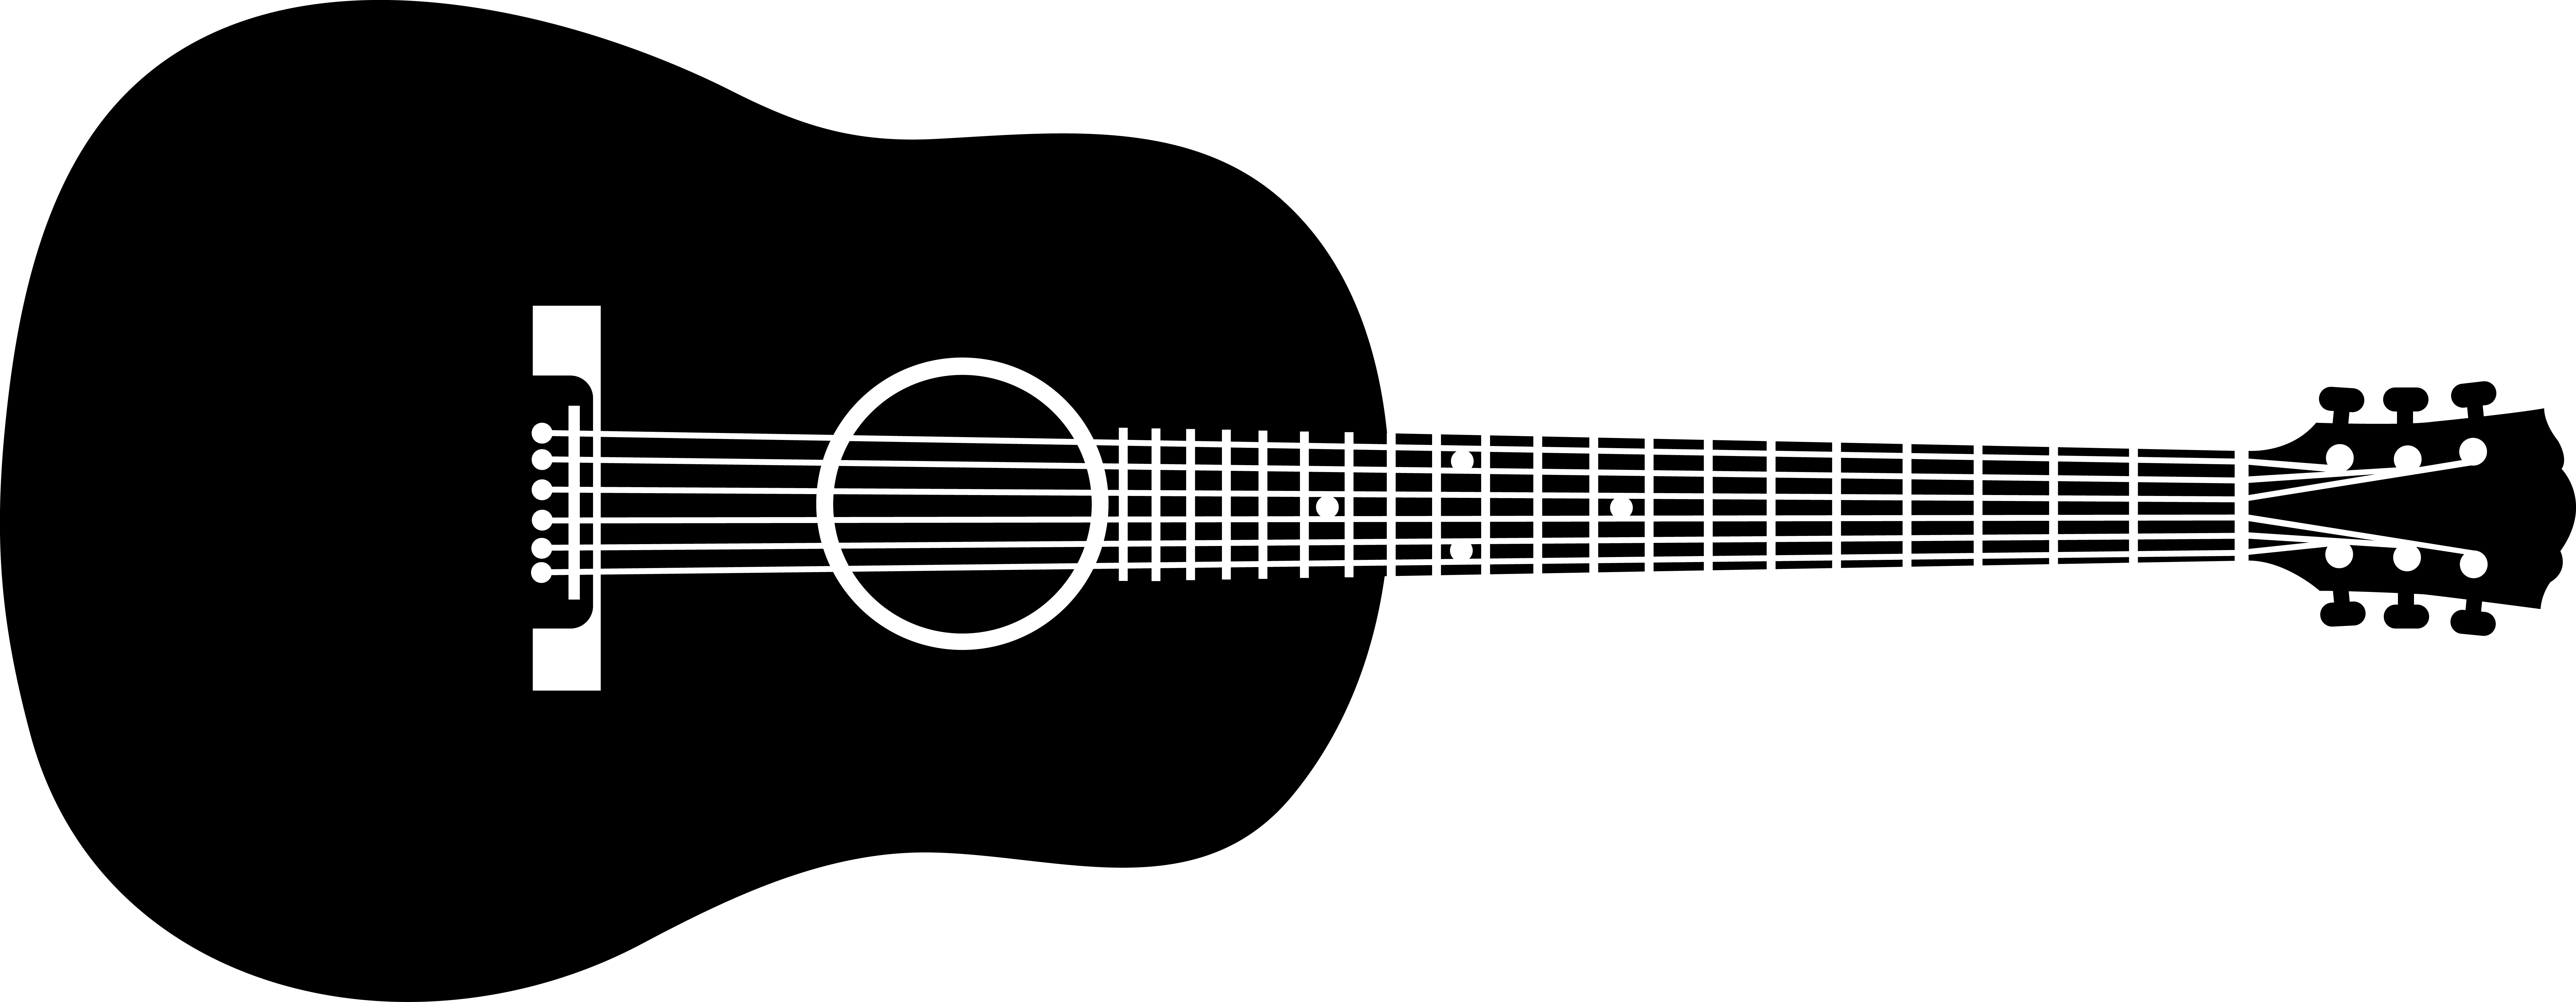 Acoustic guitar Drawing Clip 